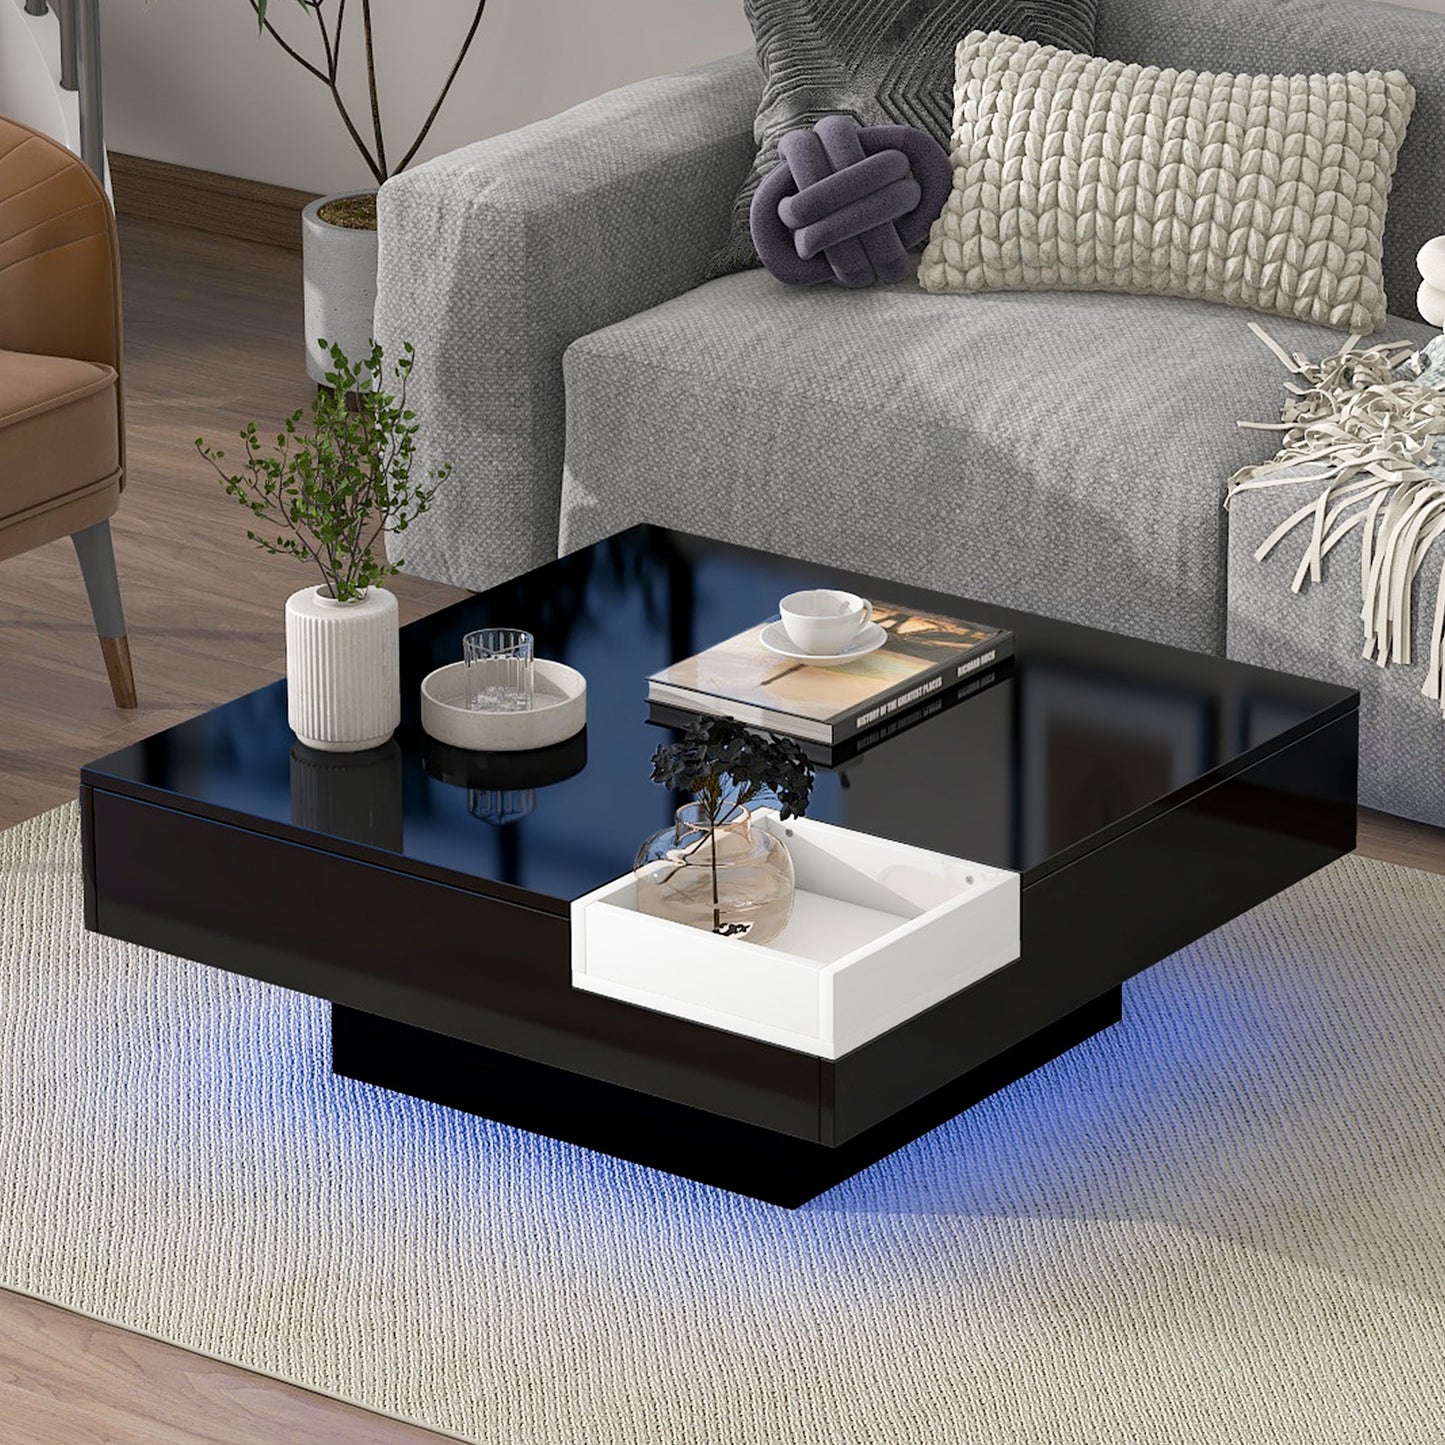 Square Coffee Table with LED Lights, HSUNNS Modern High Gloss White LED Coffee Table, End Side Table Sofa Centre Table with Detachable Tray|Remote Control 16 LED Lights, 31.5x31.5 in